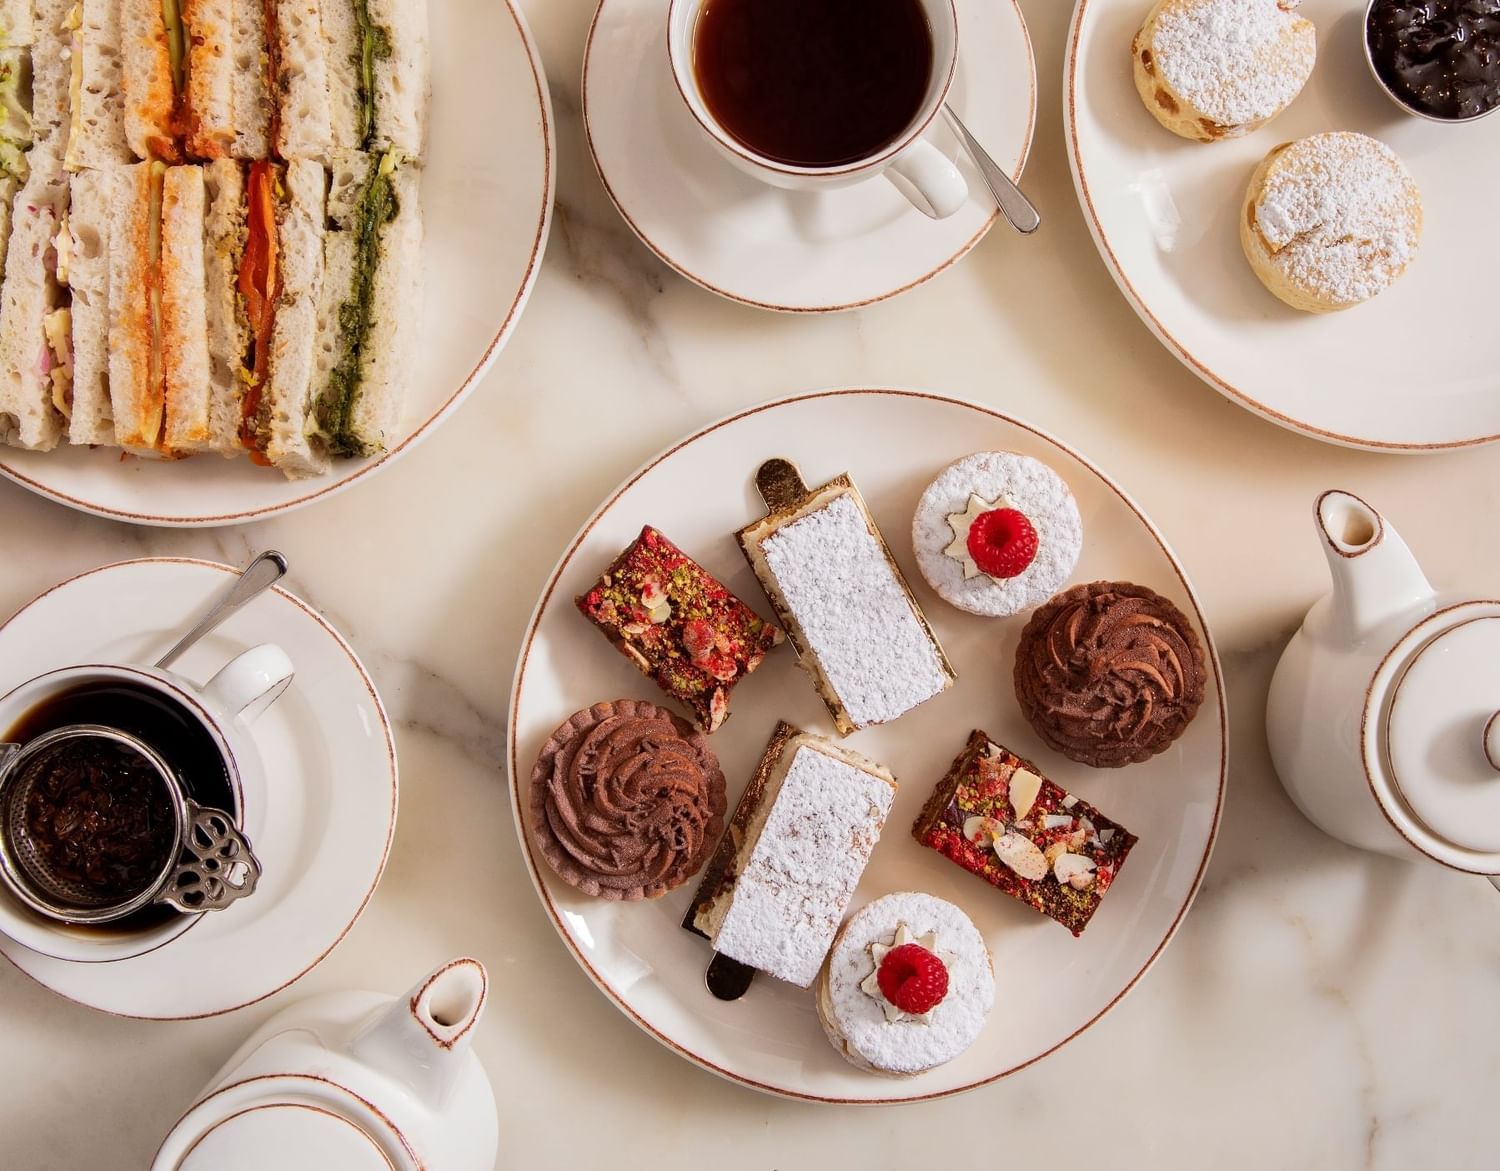 Afternoon Tea with sandwiches and cakes served in May Fair Kitchen at The May Fair Hotel